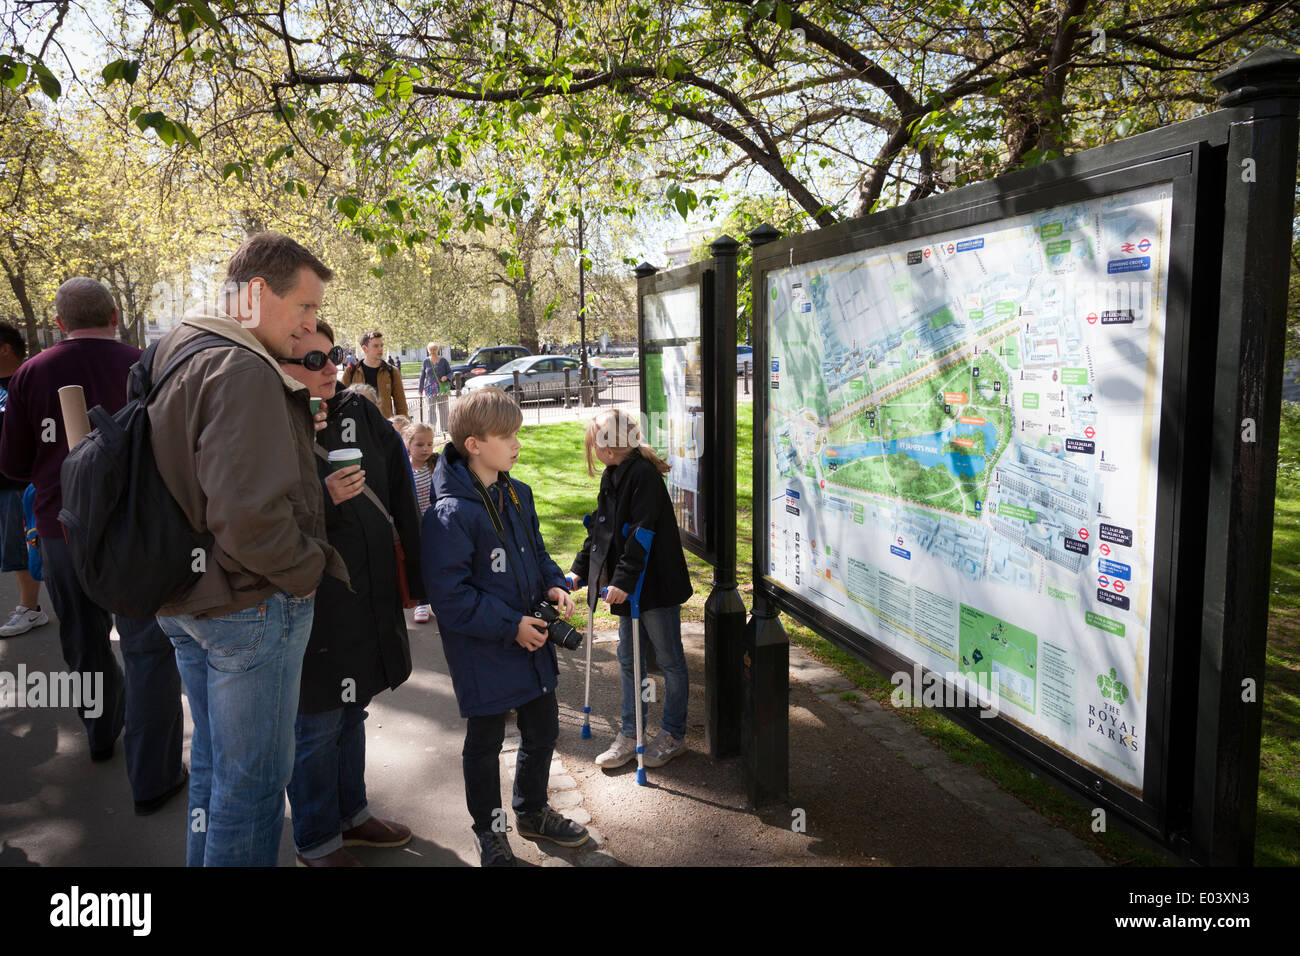 Tourists looking at location map of Green Park London. Stock Photo